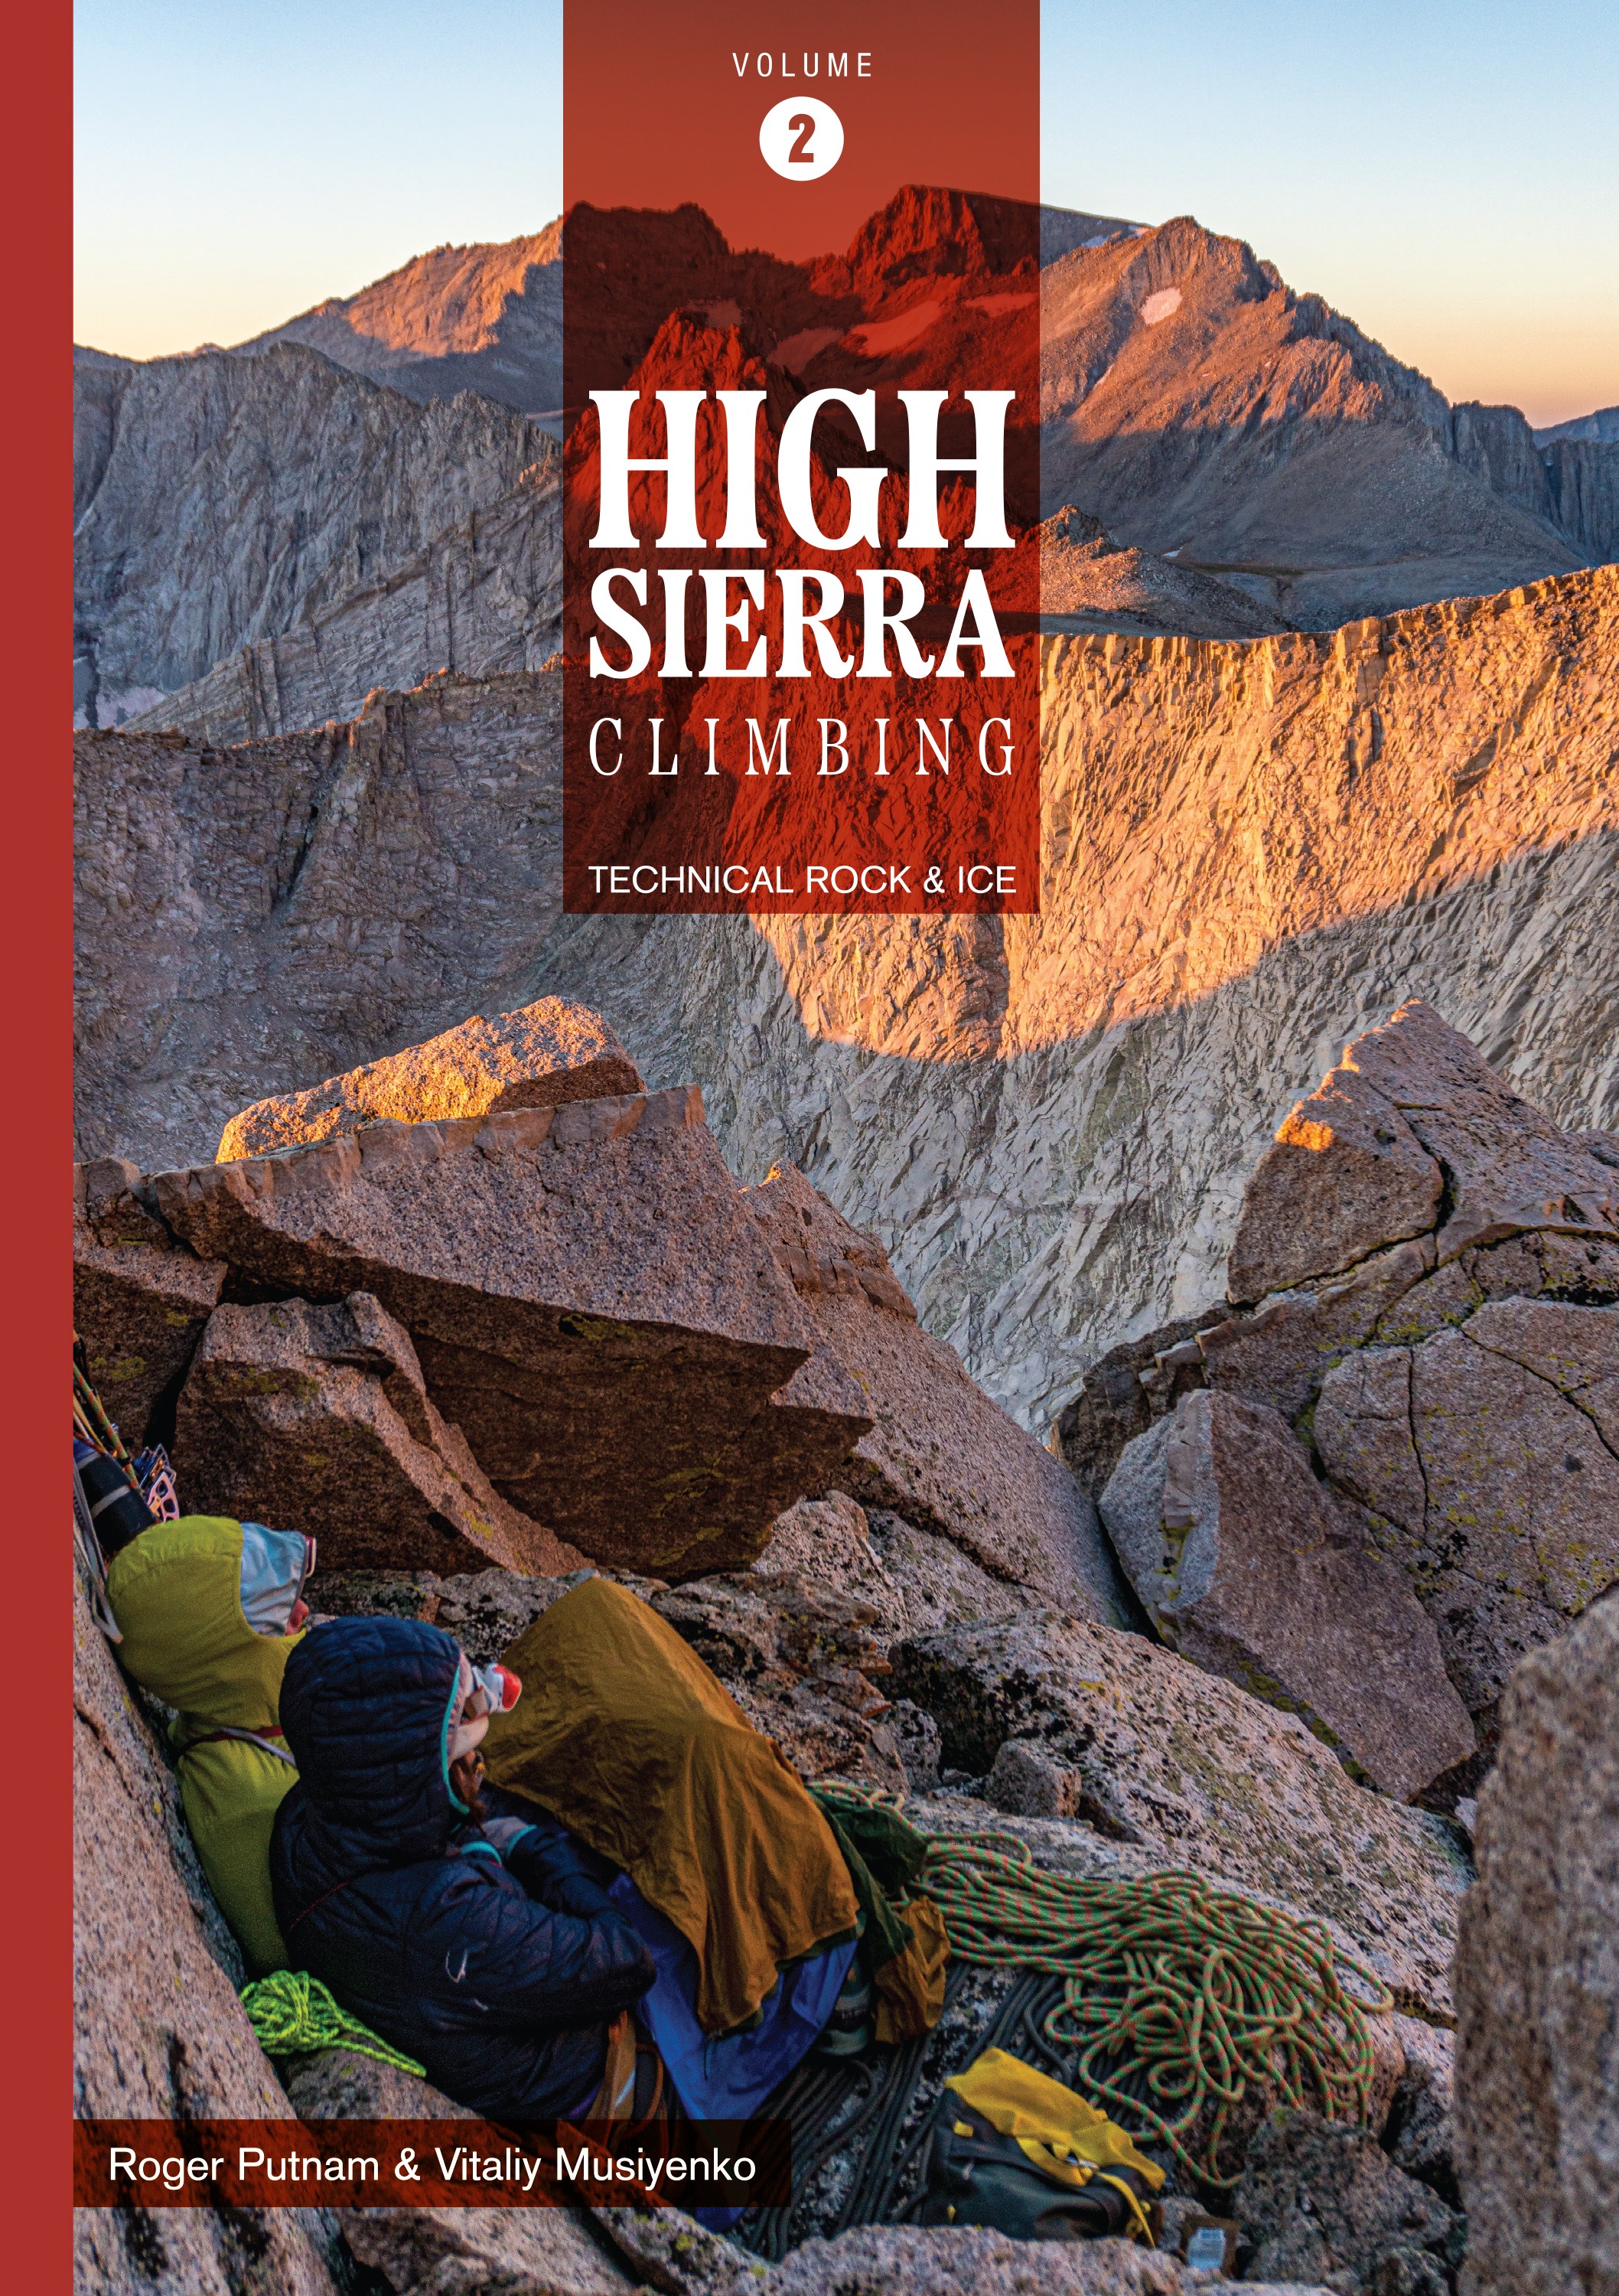 High Sierra Climbing Volume 2 (PRE-ORDER - Expected release date: April 15, 2023)